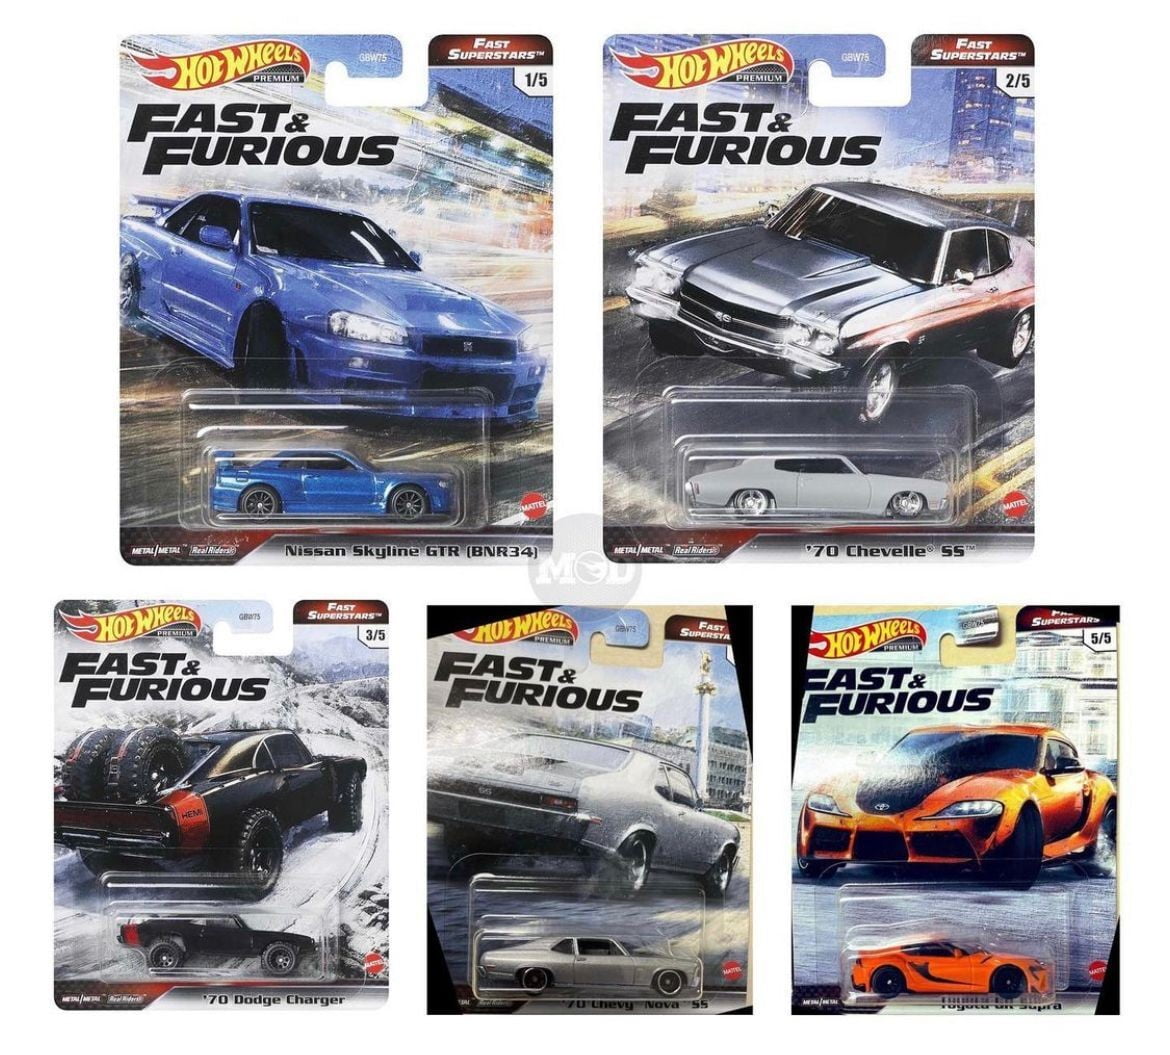 2020 Hot Wheels FAST & FURIOUS Set of all 5 Cars Walmart Exclusive Nissan Ford